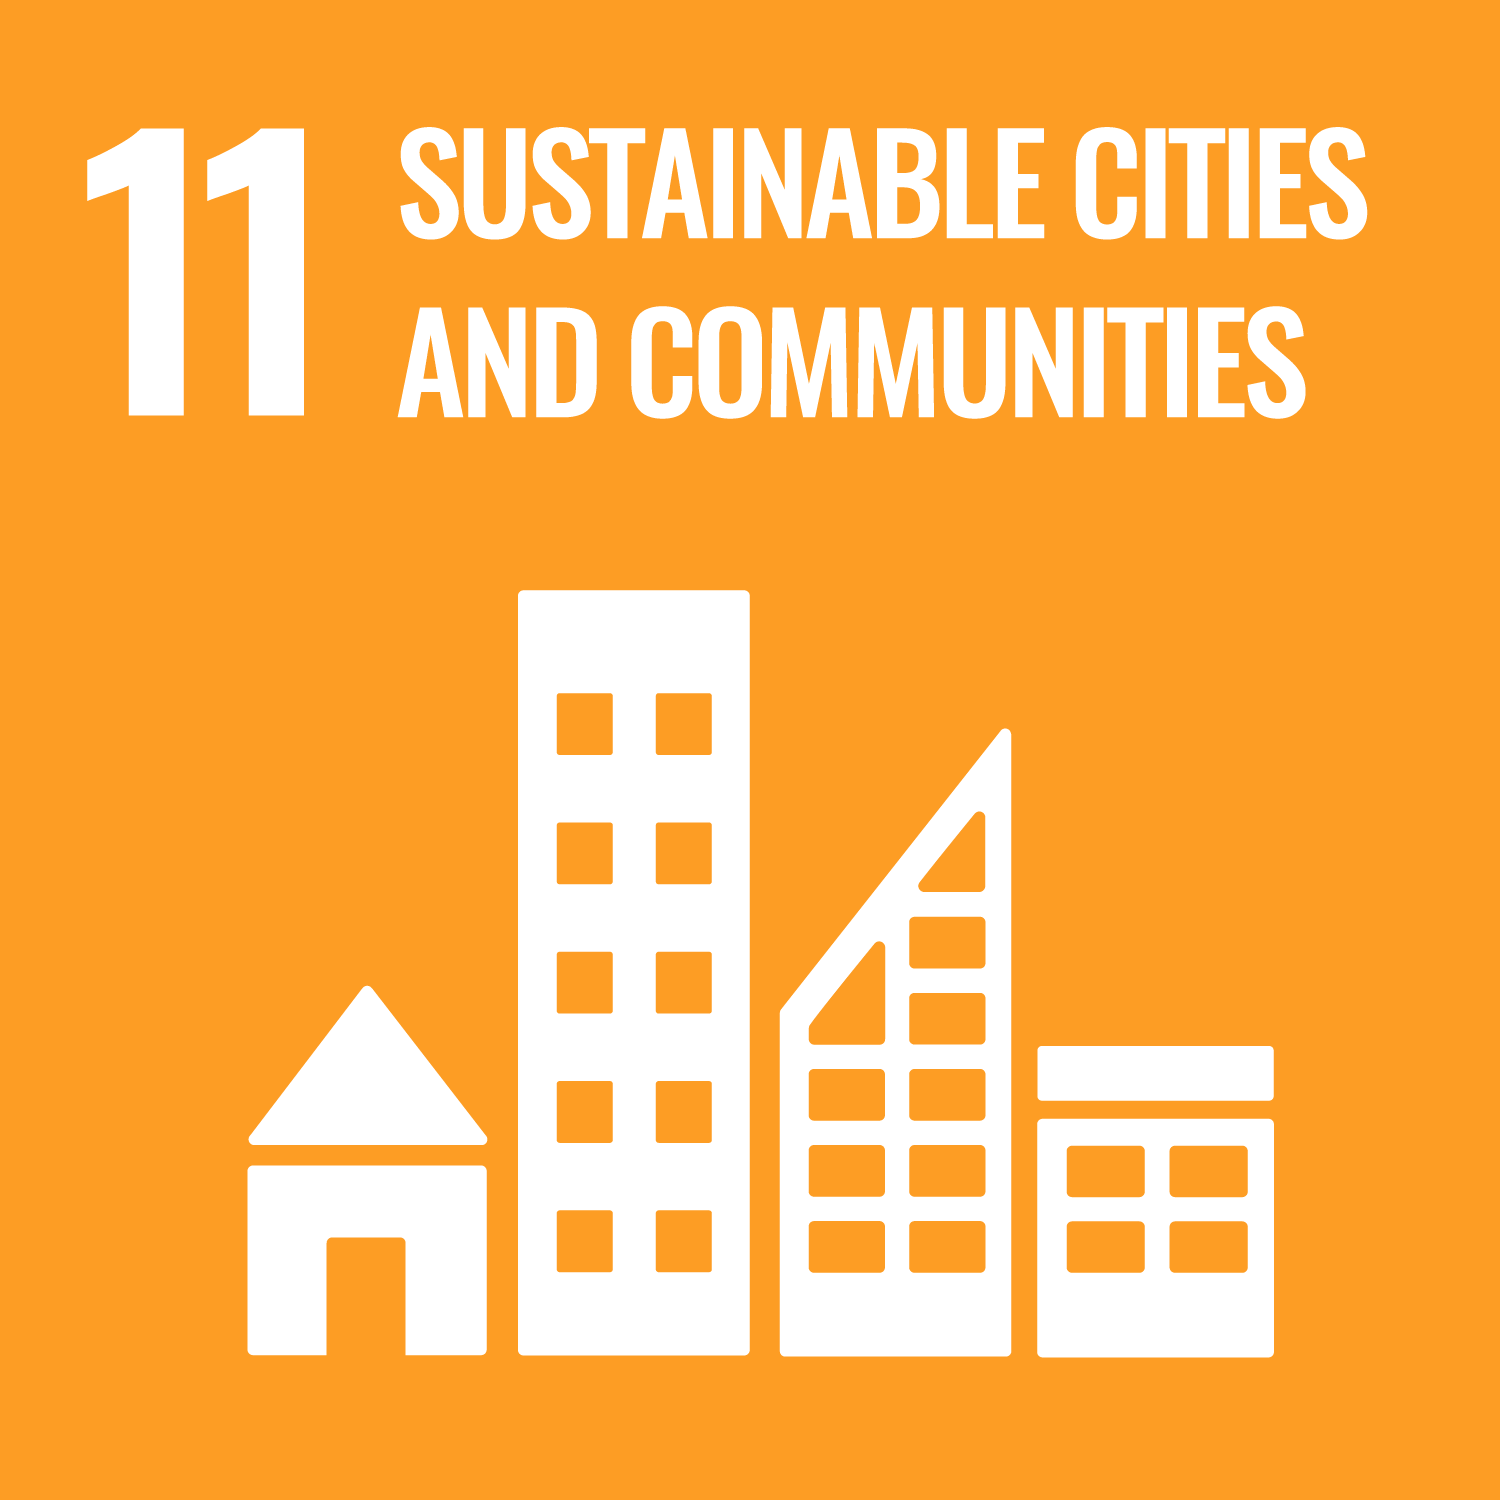 SDG Goal 11: Sustainable Cities and Communities